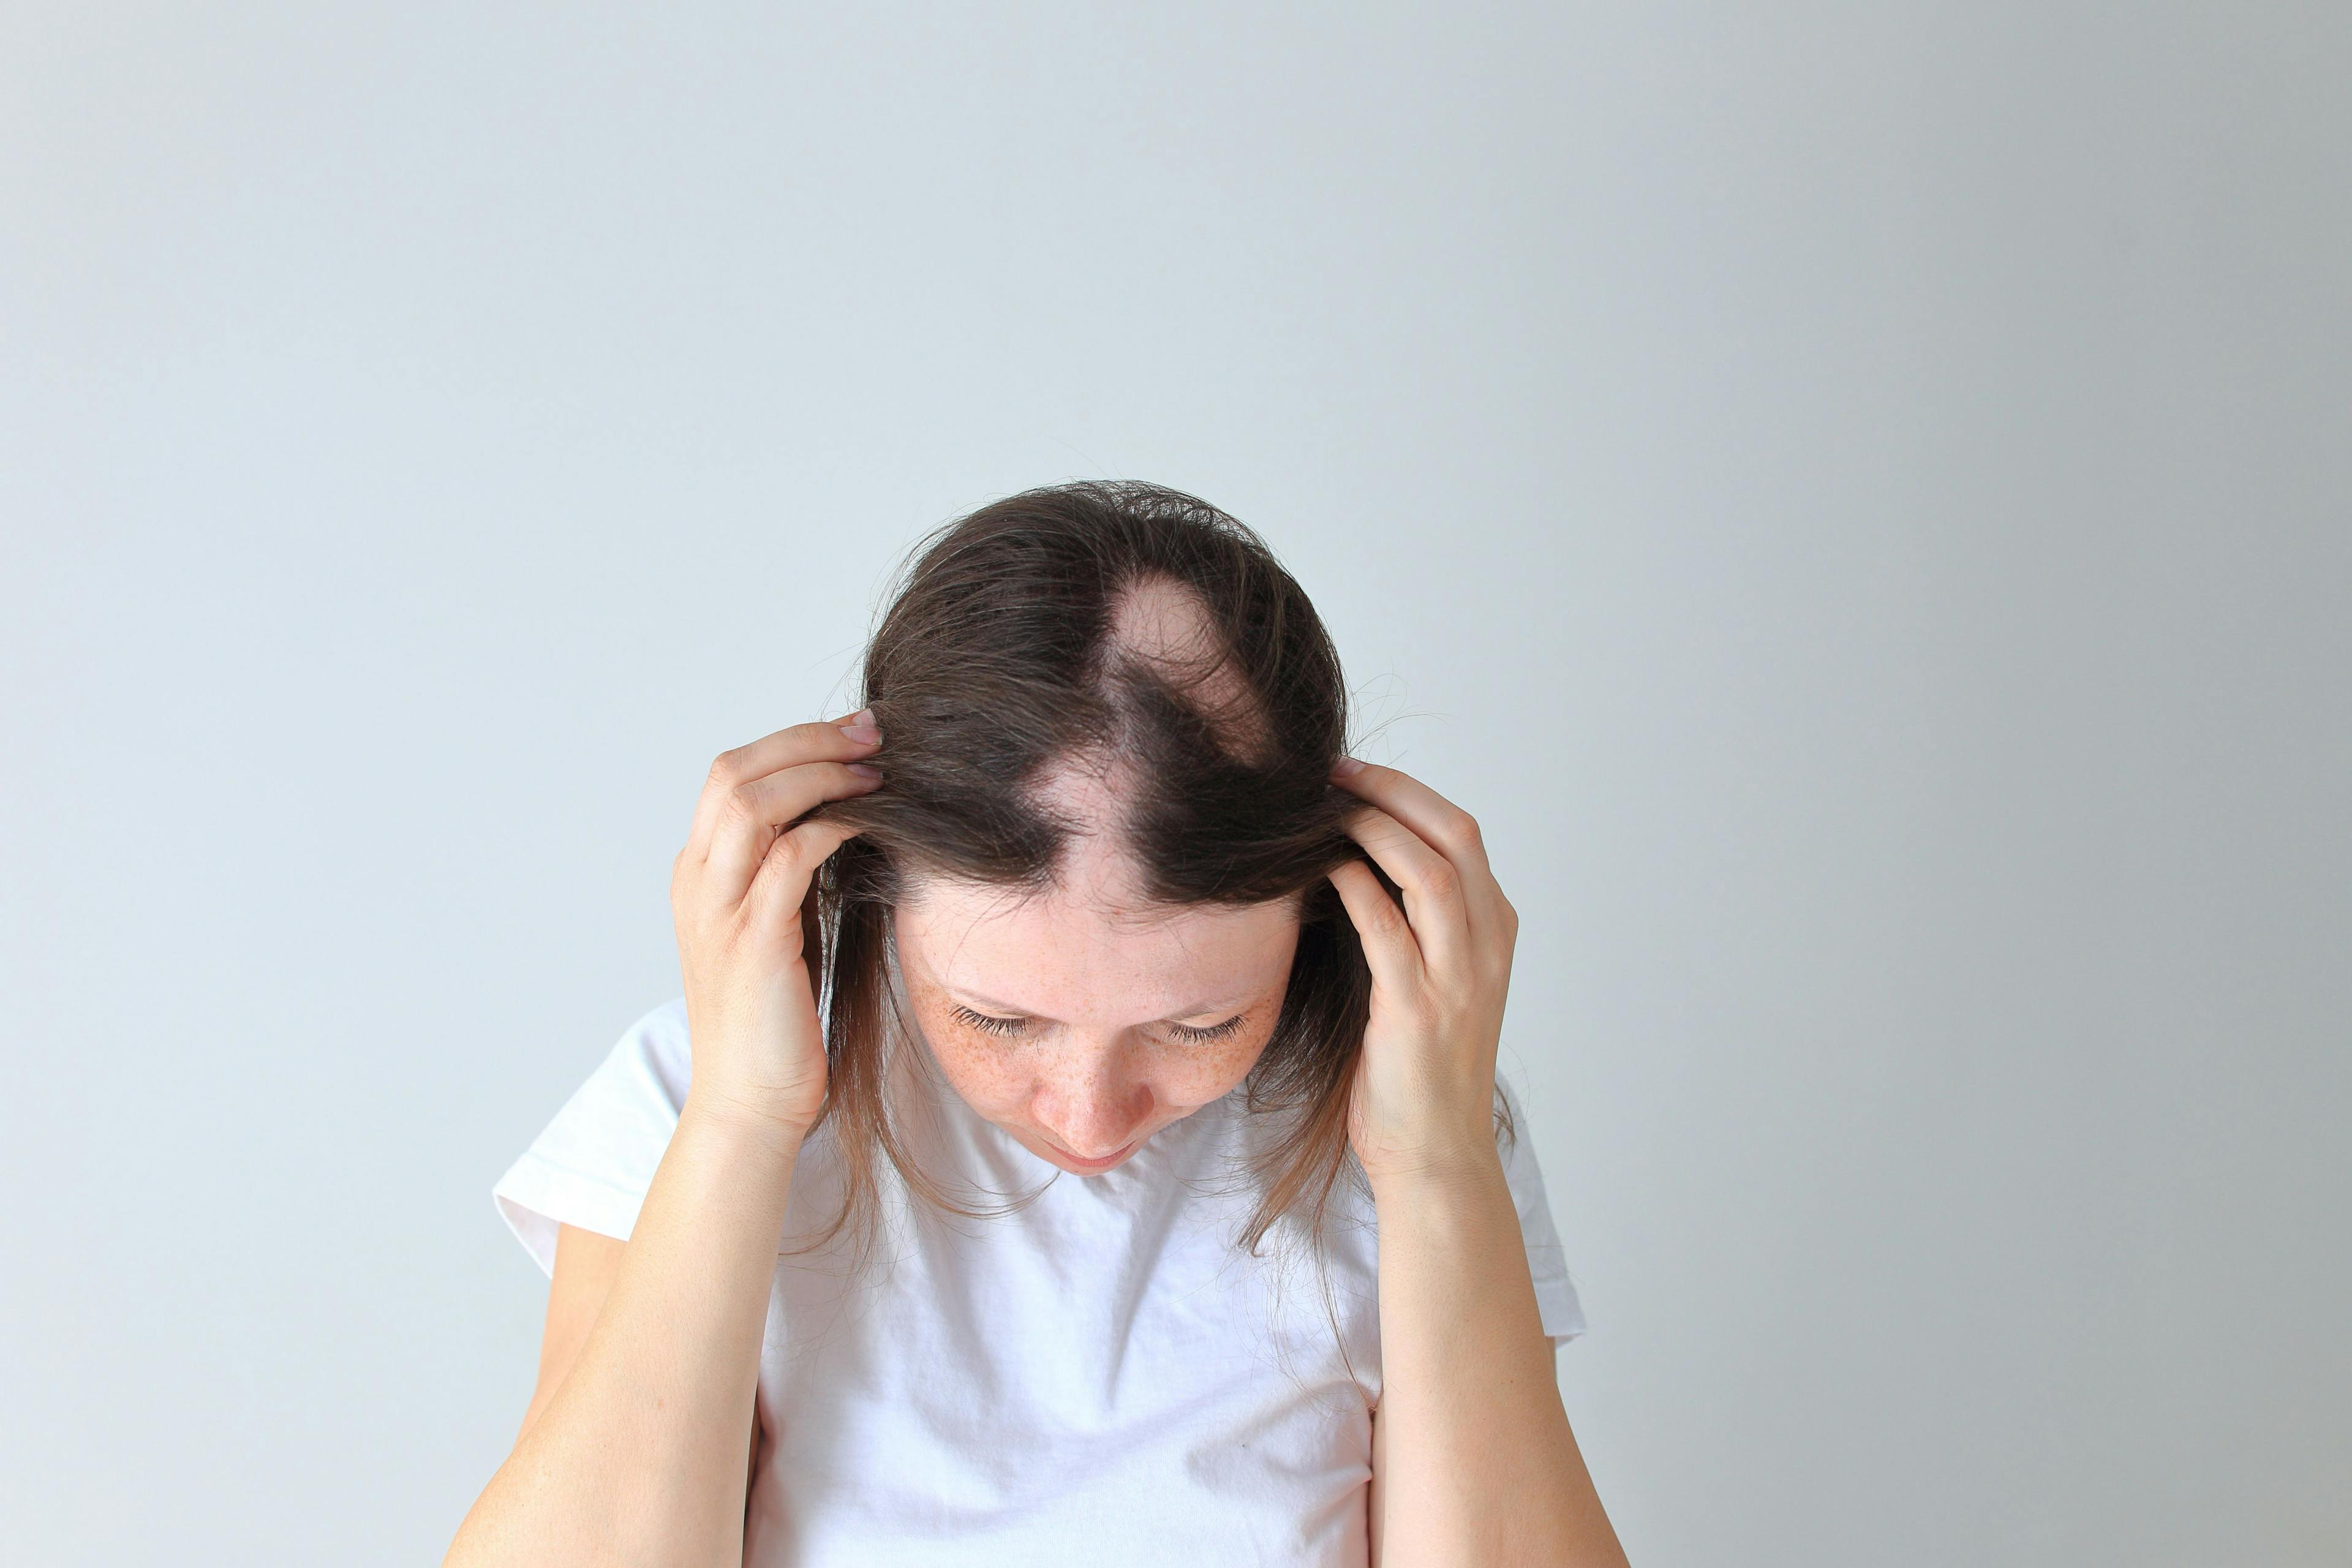 Increased Risk of Suicide Attempts in Alopecia Areata Patients